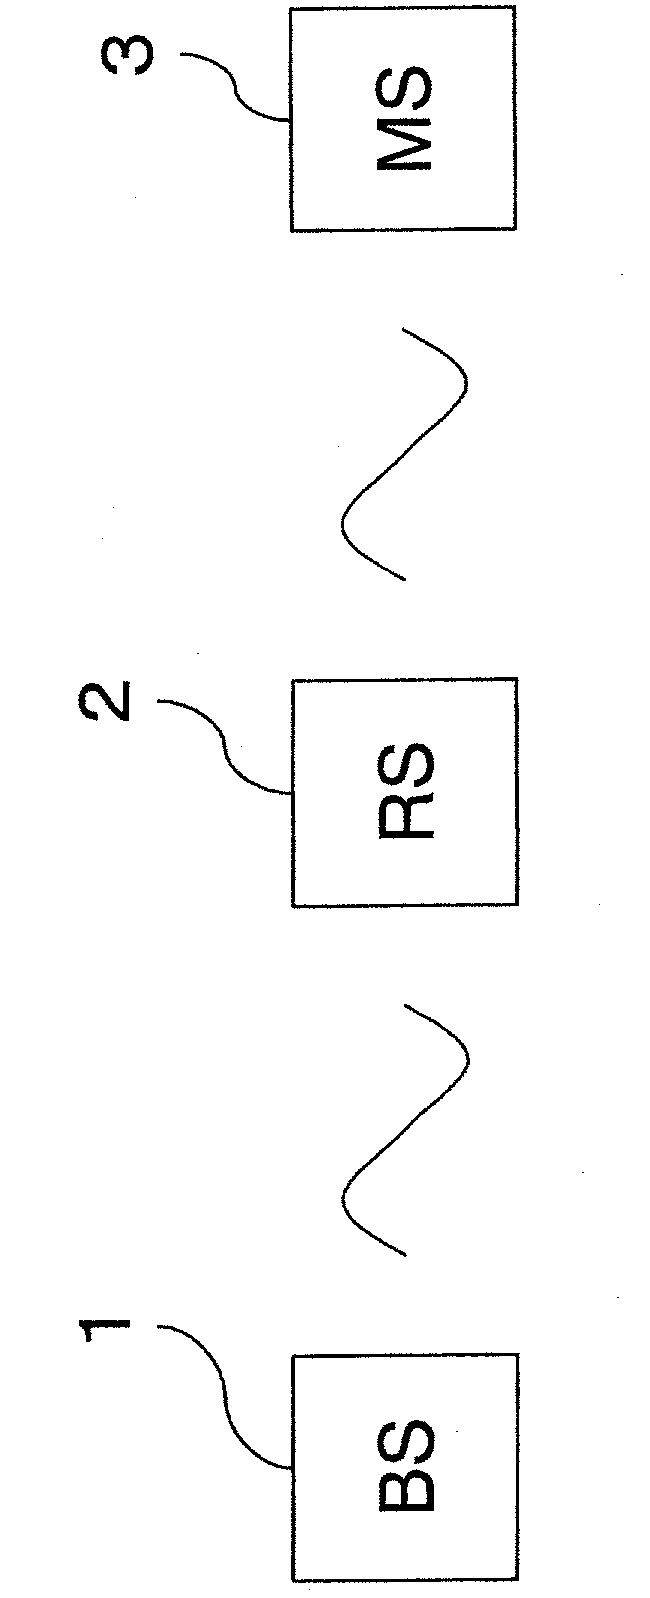 Control method in wireless electric communication system